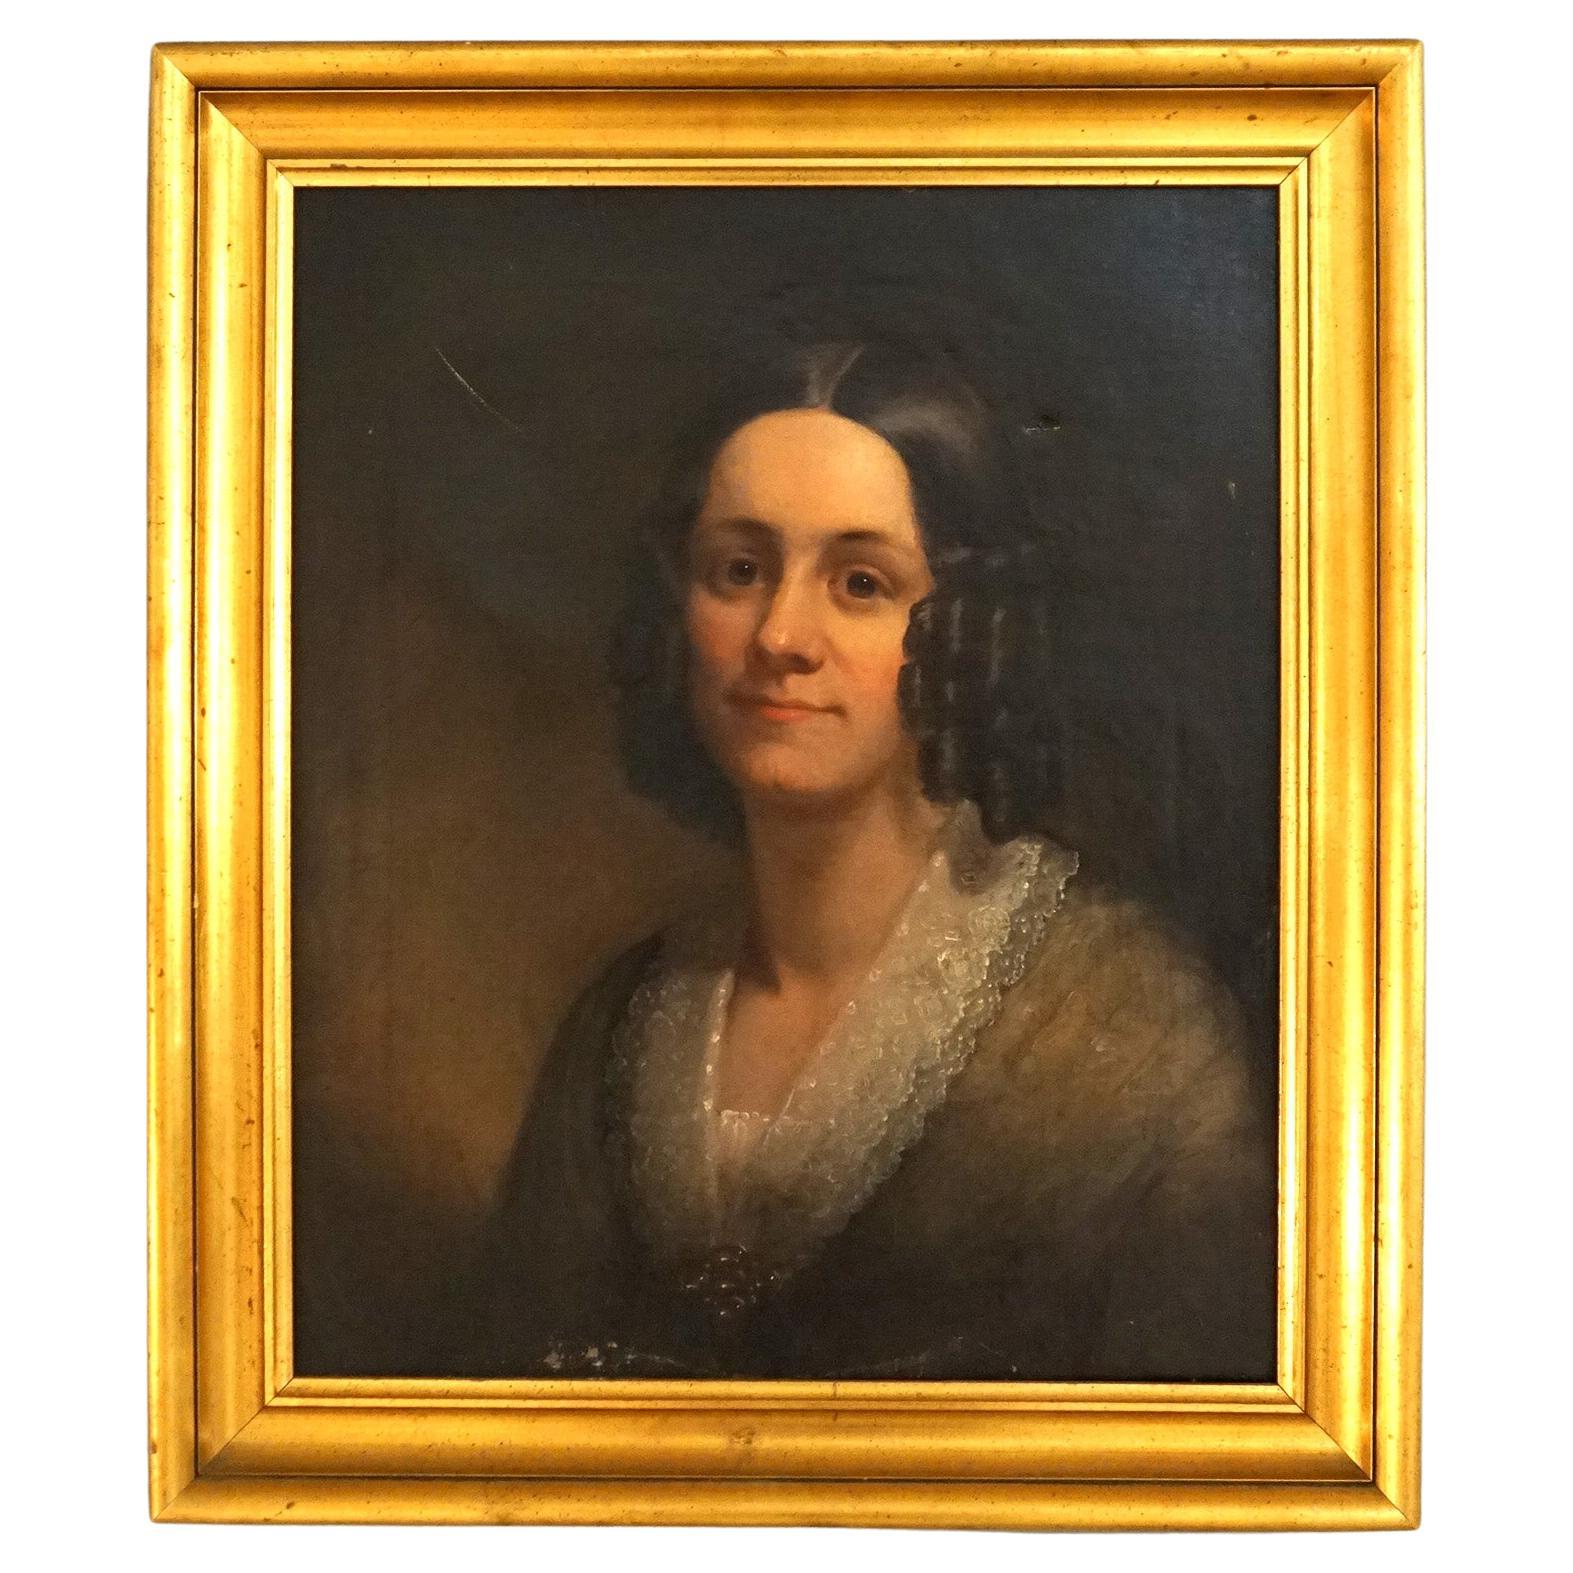 Antique Portrait Painting of a Woman, Signed  G.L.Gilbert 1844 on Reverse